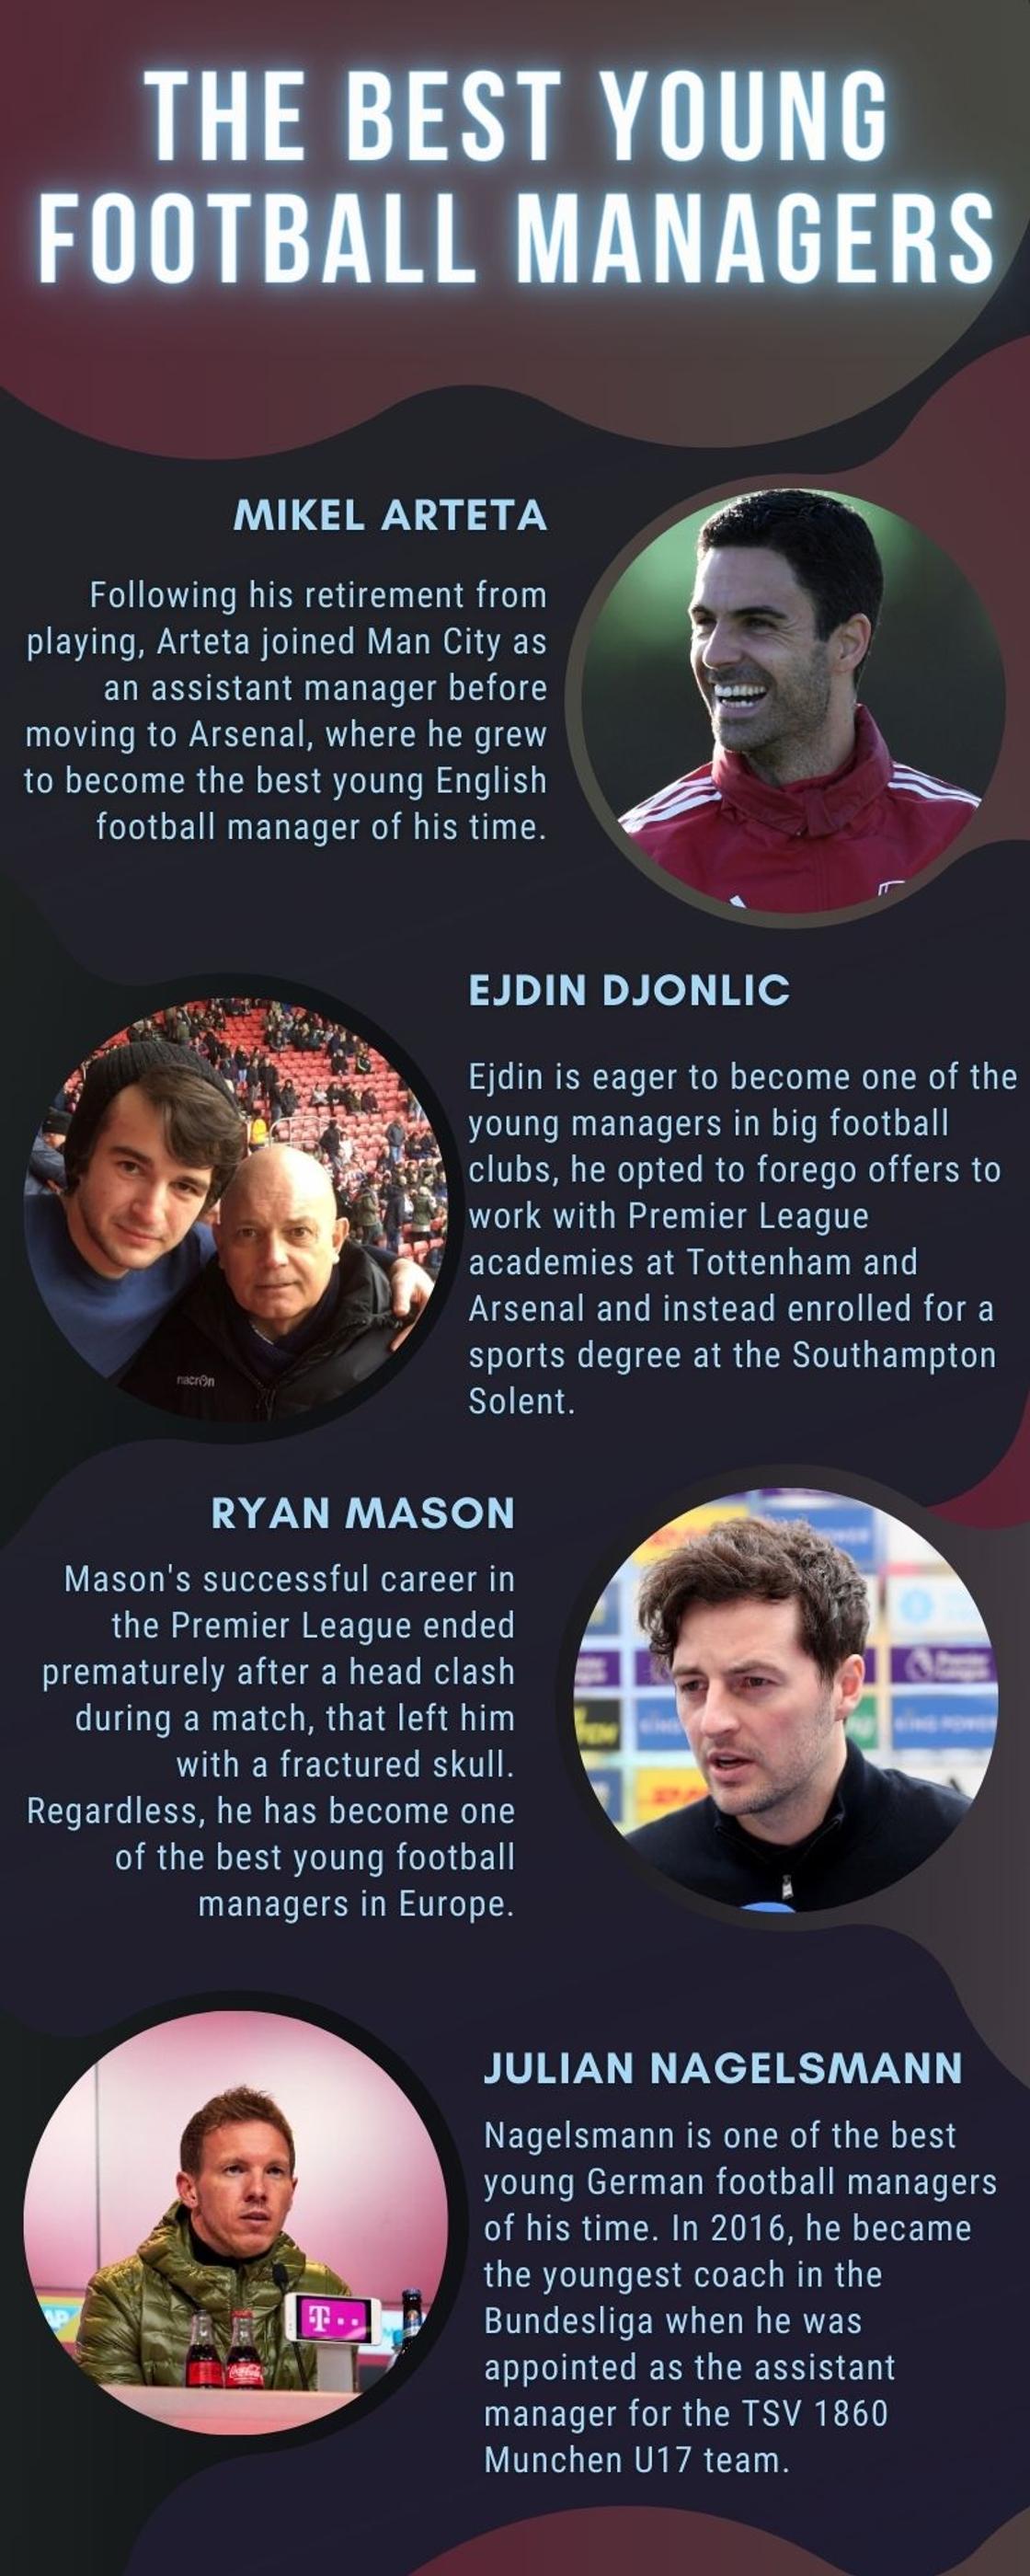 The best young football managers